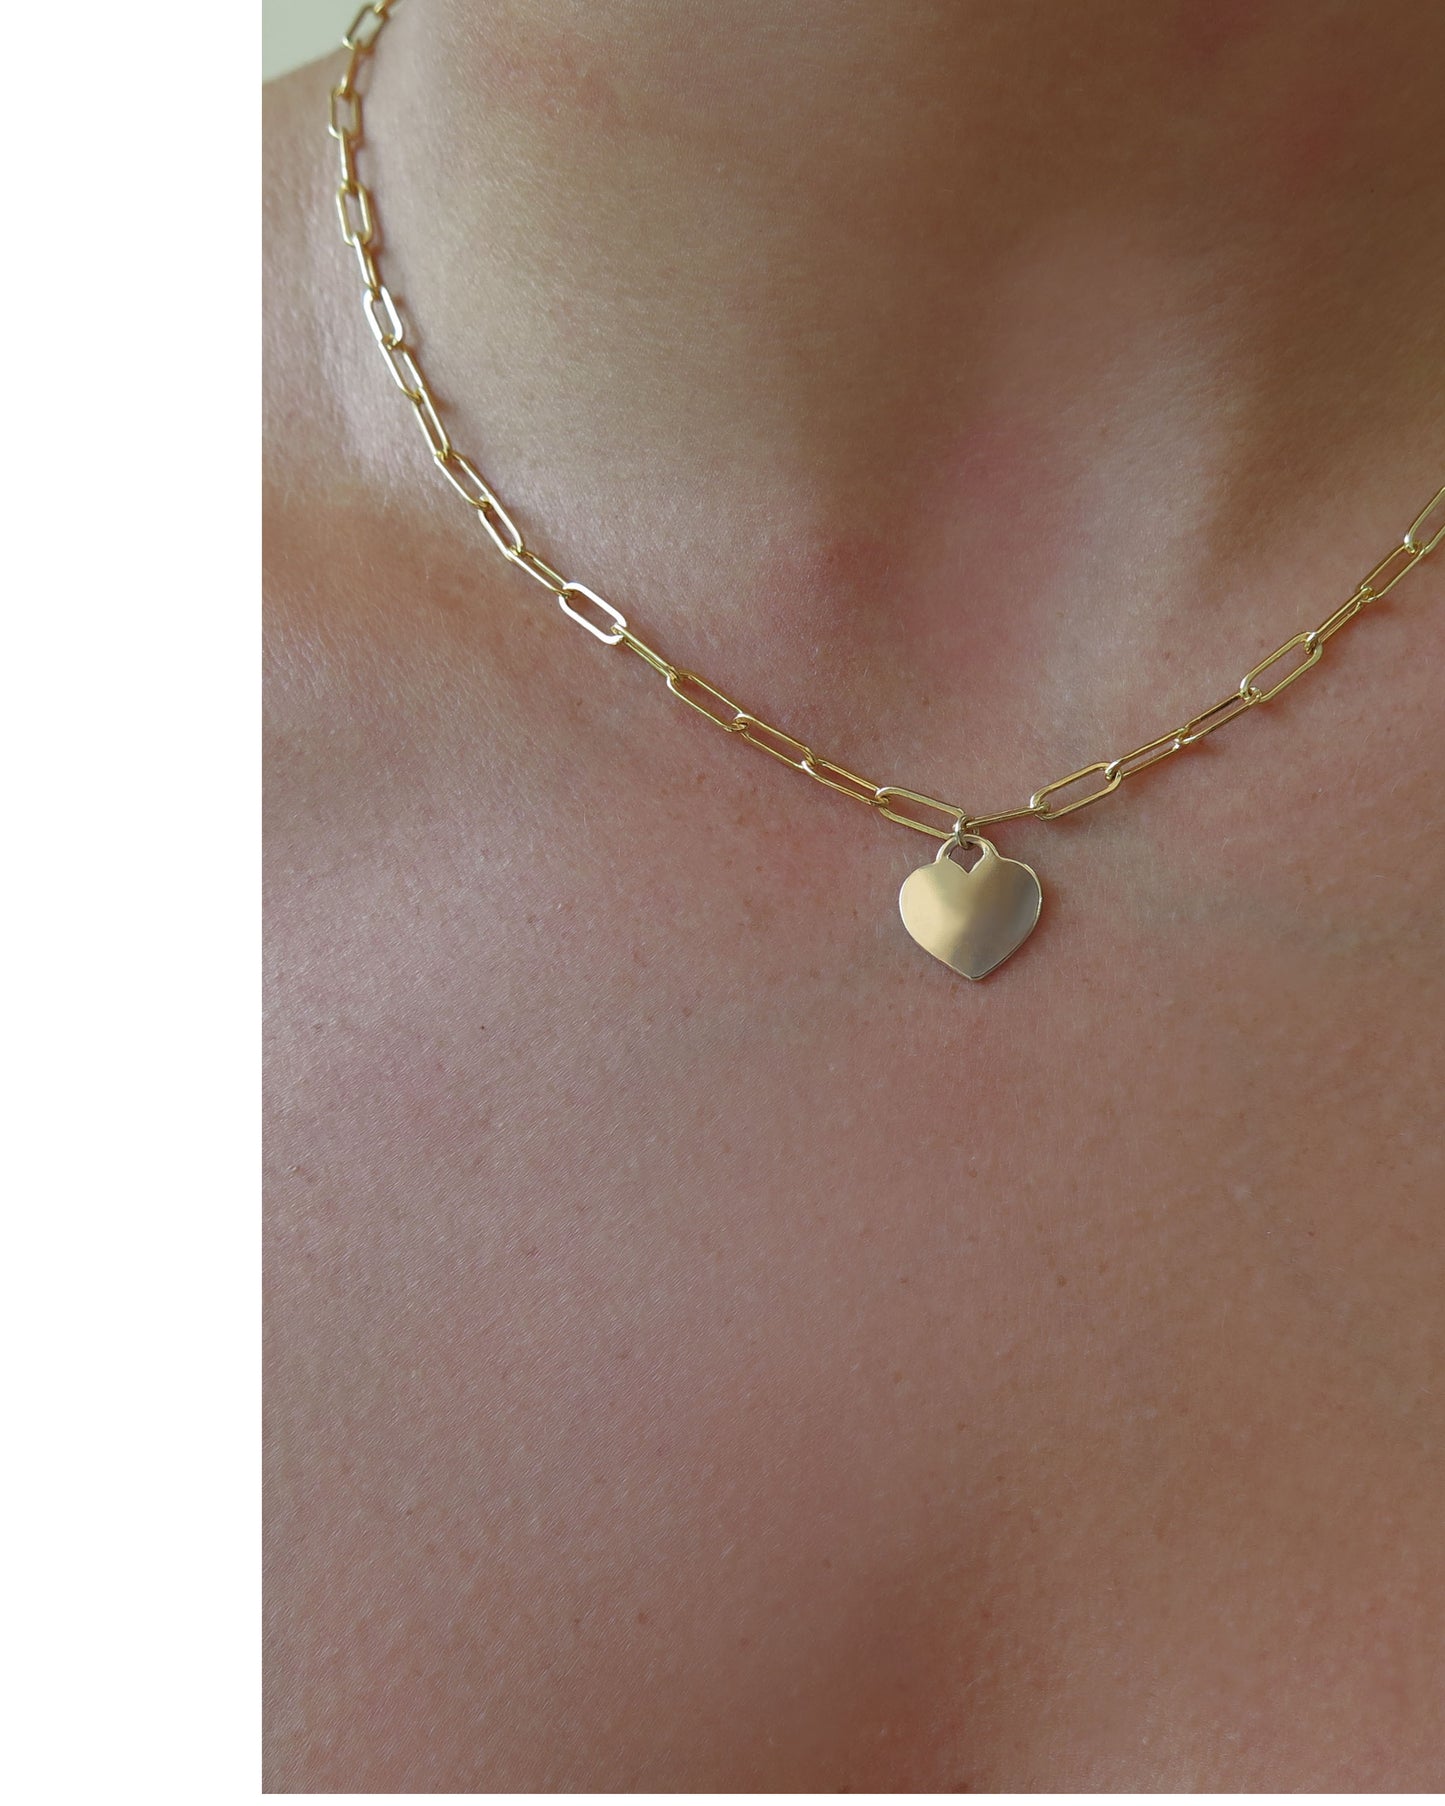 THICK DRAWN CABLE CHAIN HEART NECKLACE- 14k Yellow Gold Fill